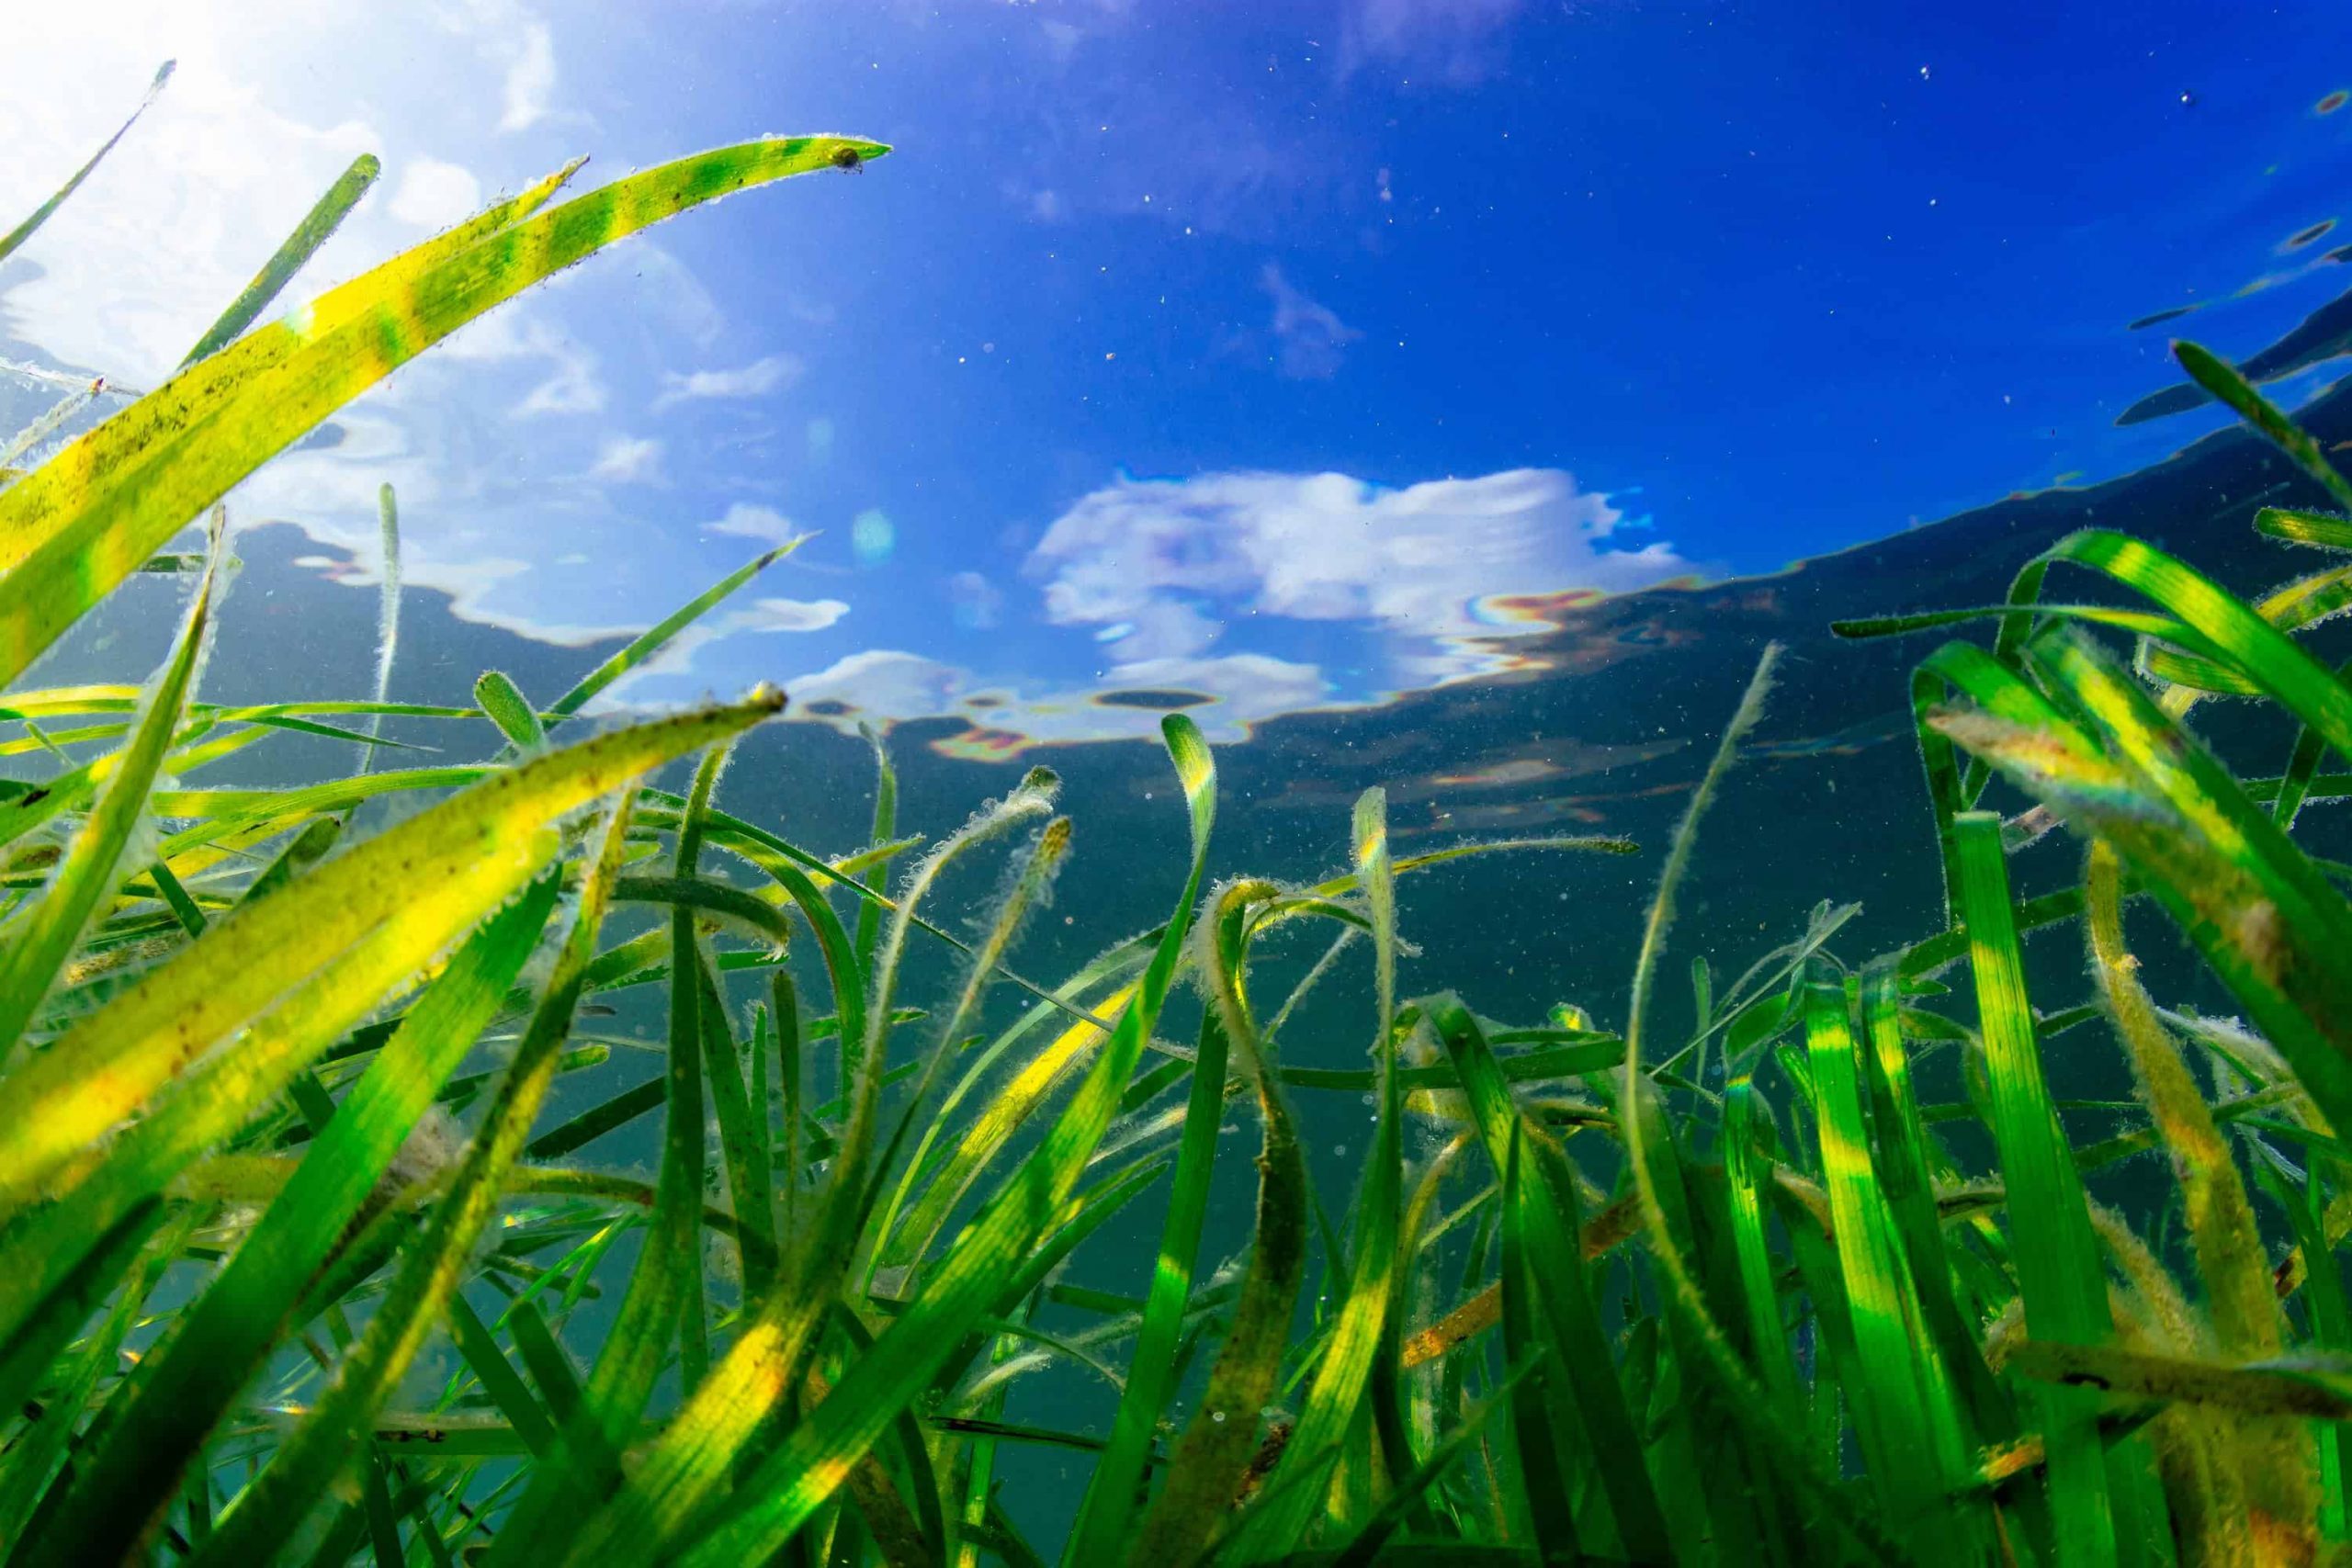 Scheme launched to restore ‘wonder plant’ seagrass in UK waters